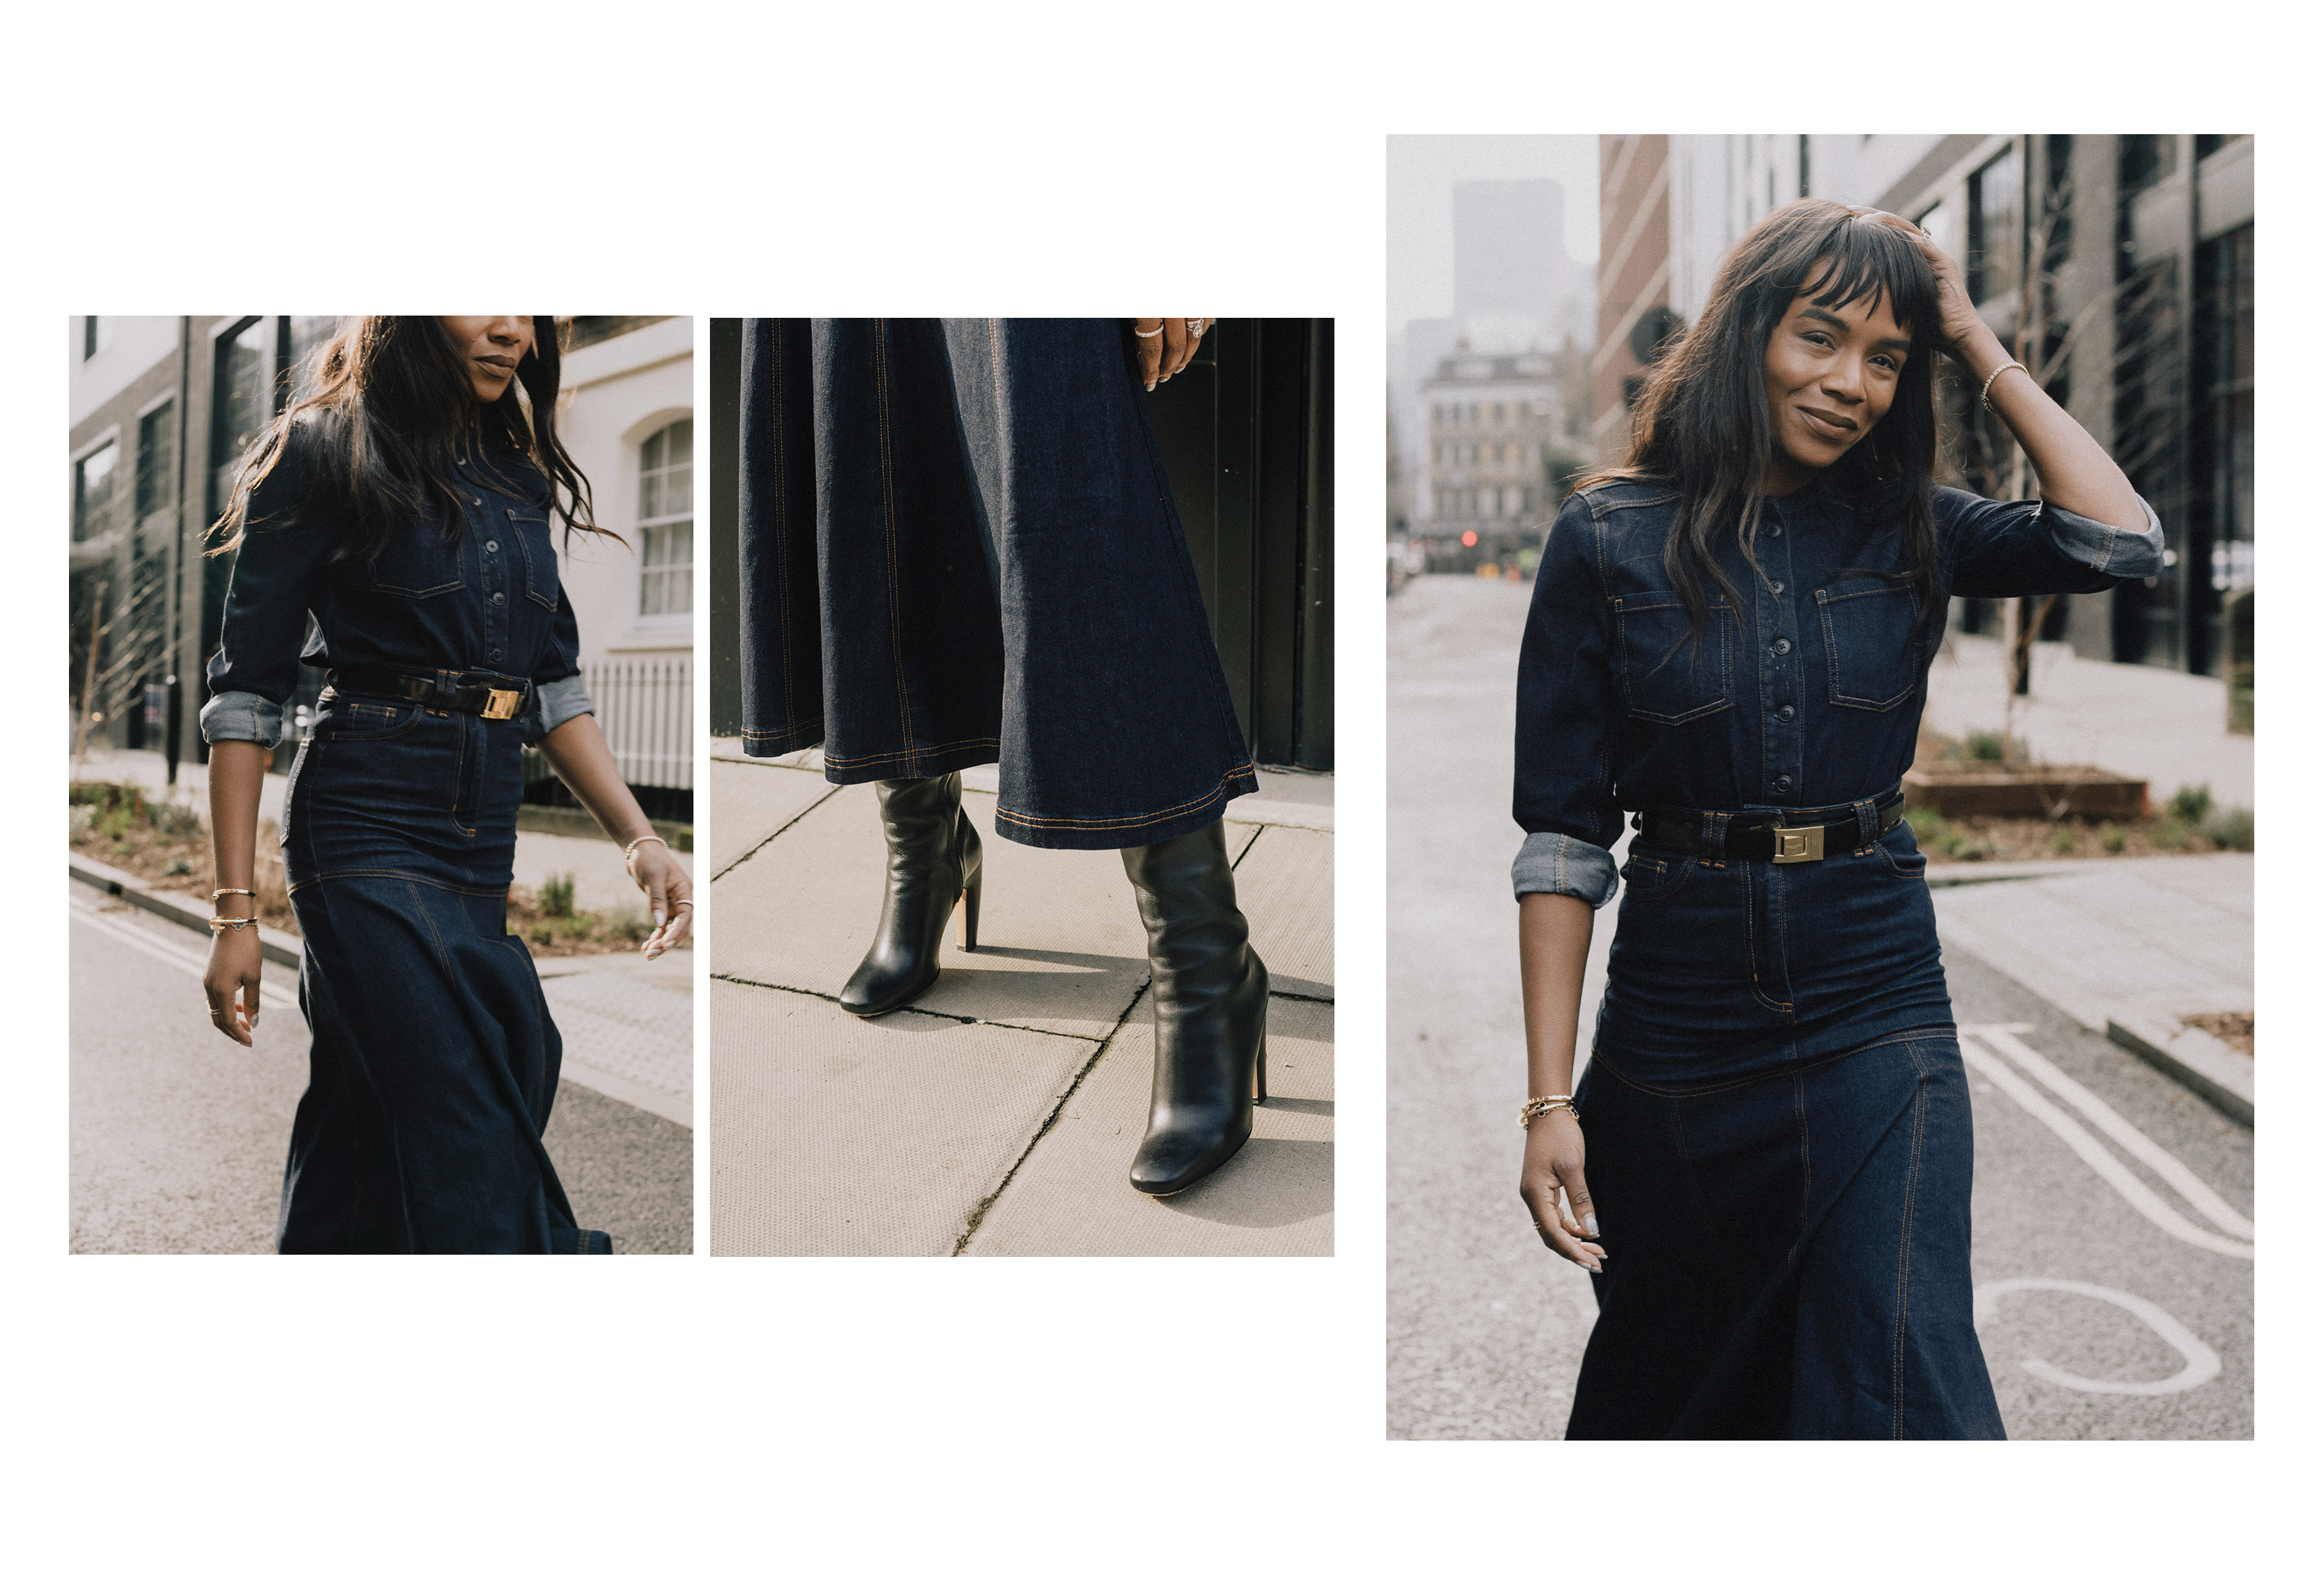 Jordan Mitchell in wears a denim button-down and midi skirt and black, heeled boots